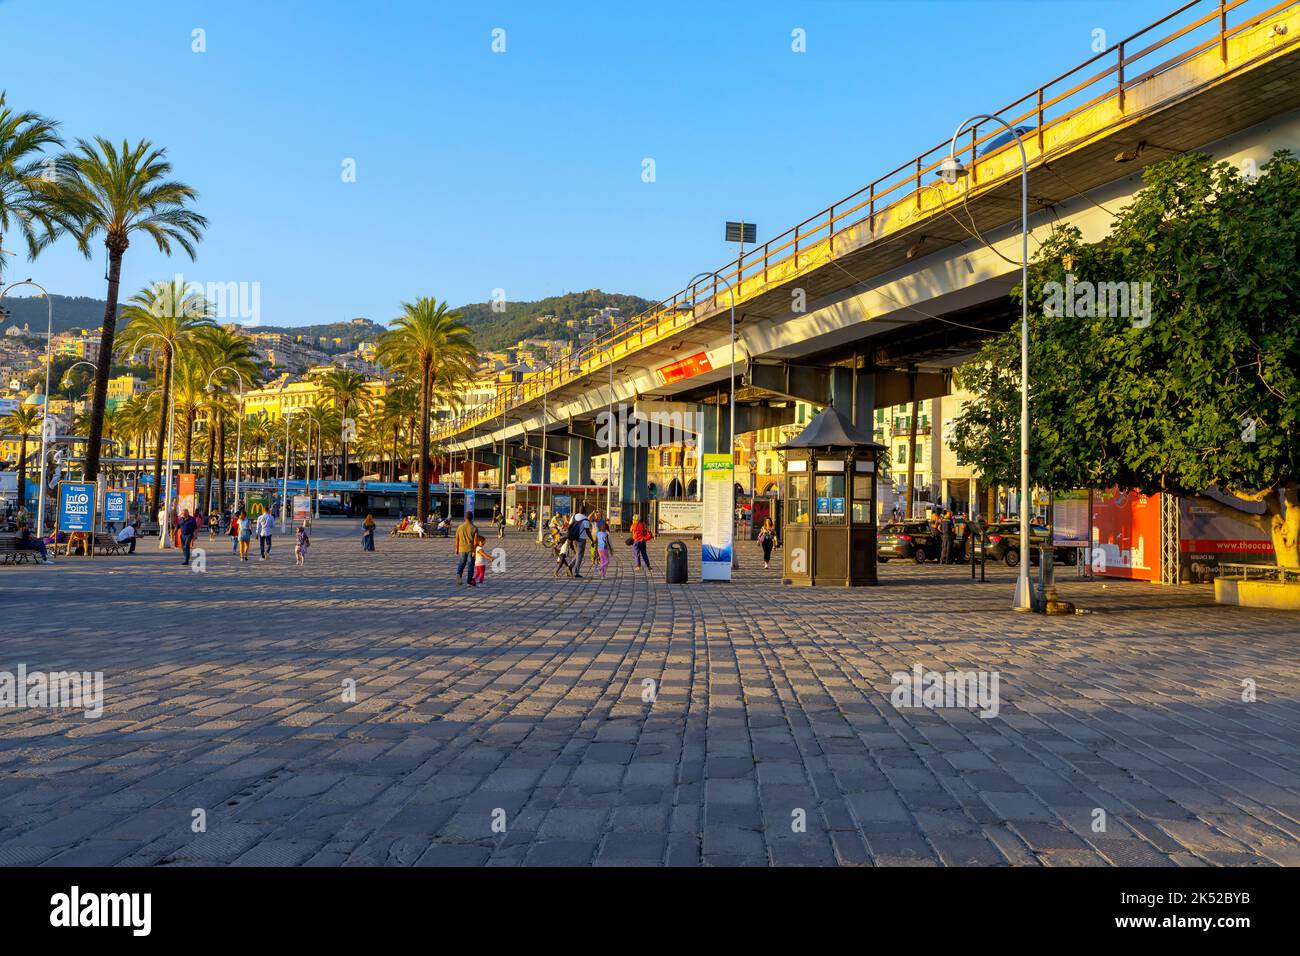 Genovas beautiful waterfront covered by misplaced autostrada (highway). City of Genoa, capital of Liguria, Italy. Stock Photo